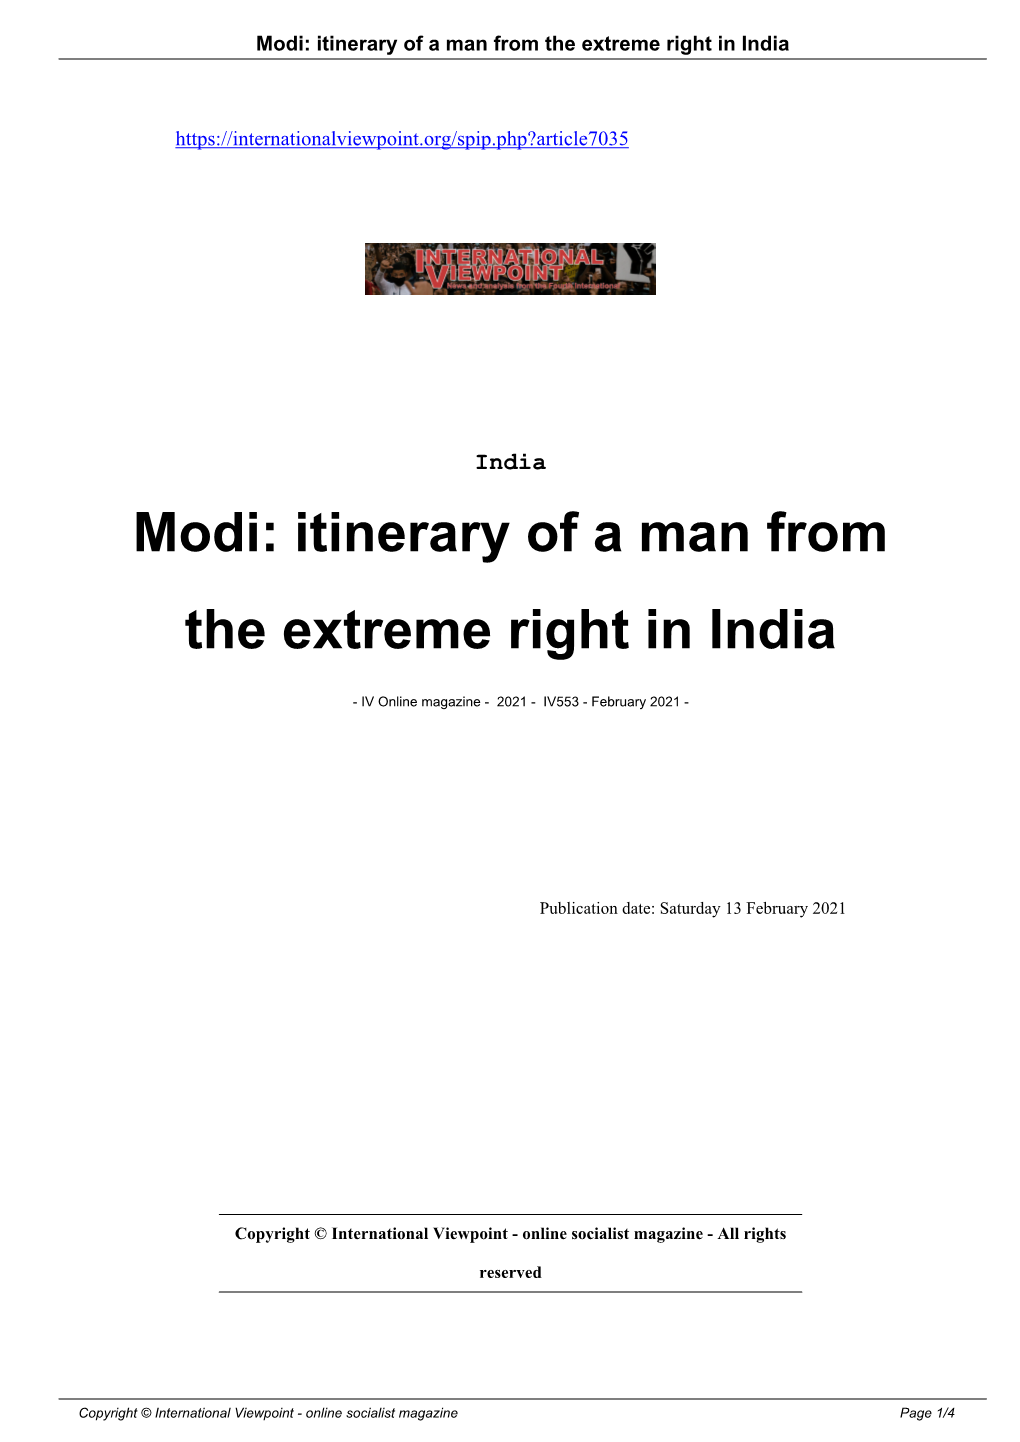 Modi: Itinerary of a Man from the Extreme Right in India